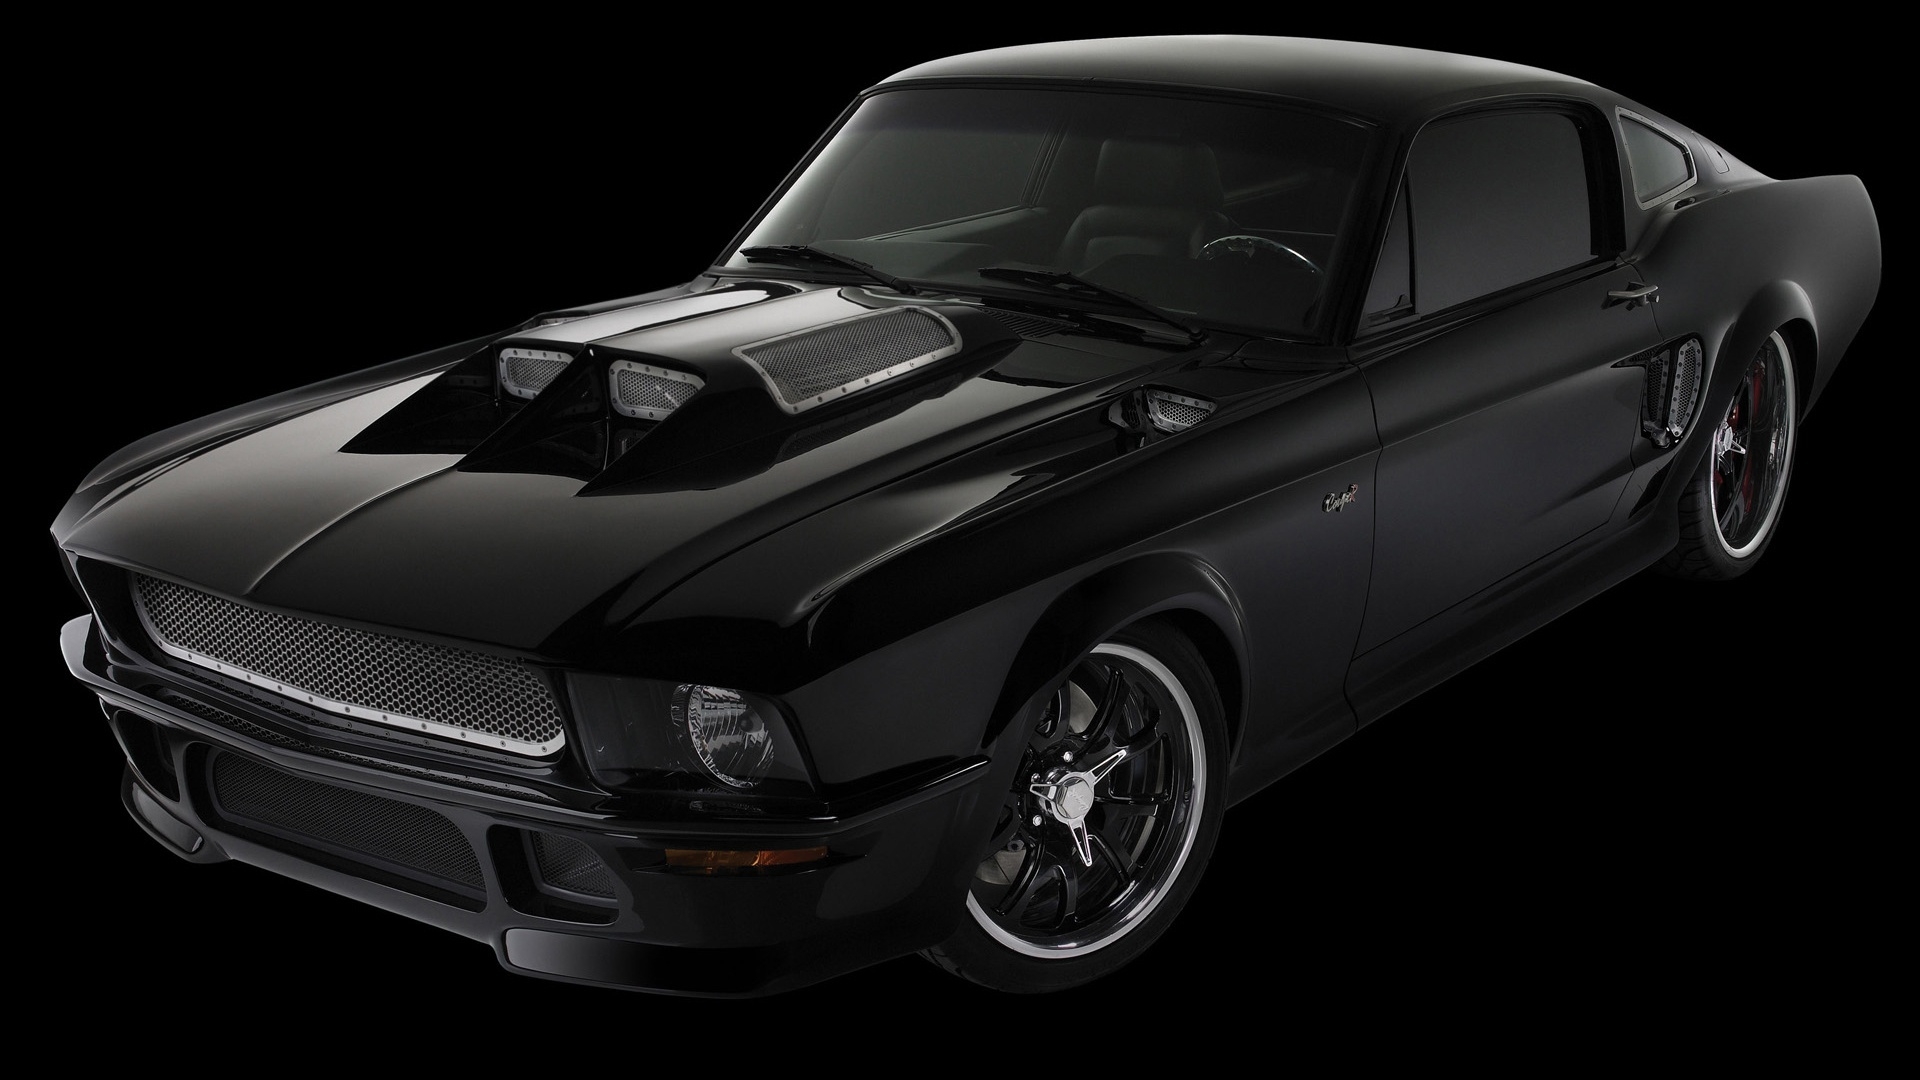 Ford Mustang Obsidian 2008 for 1920 x 1080 HDTV 1080p resolution